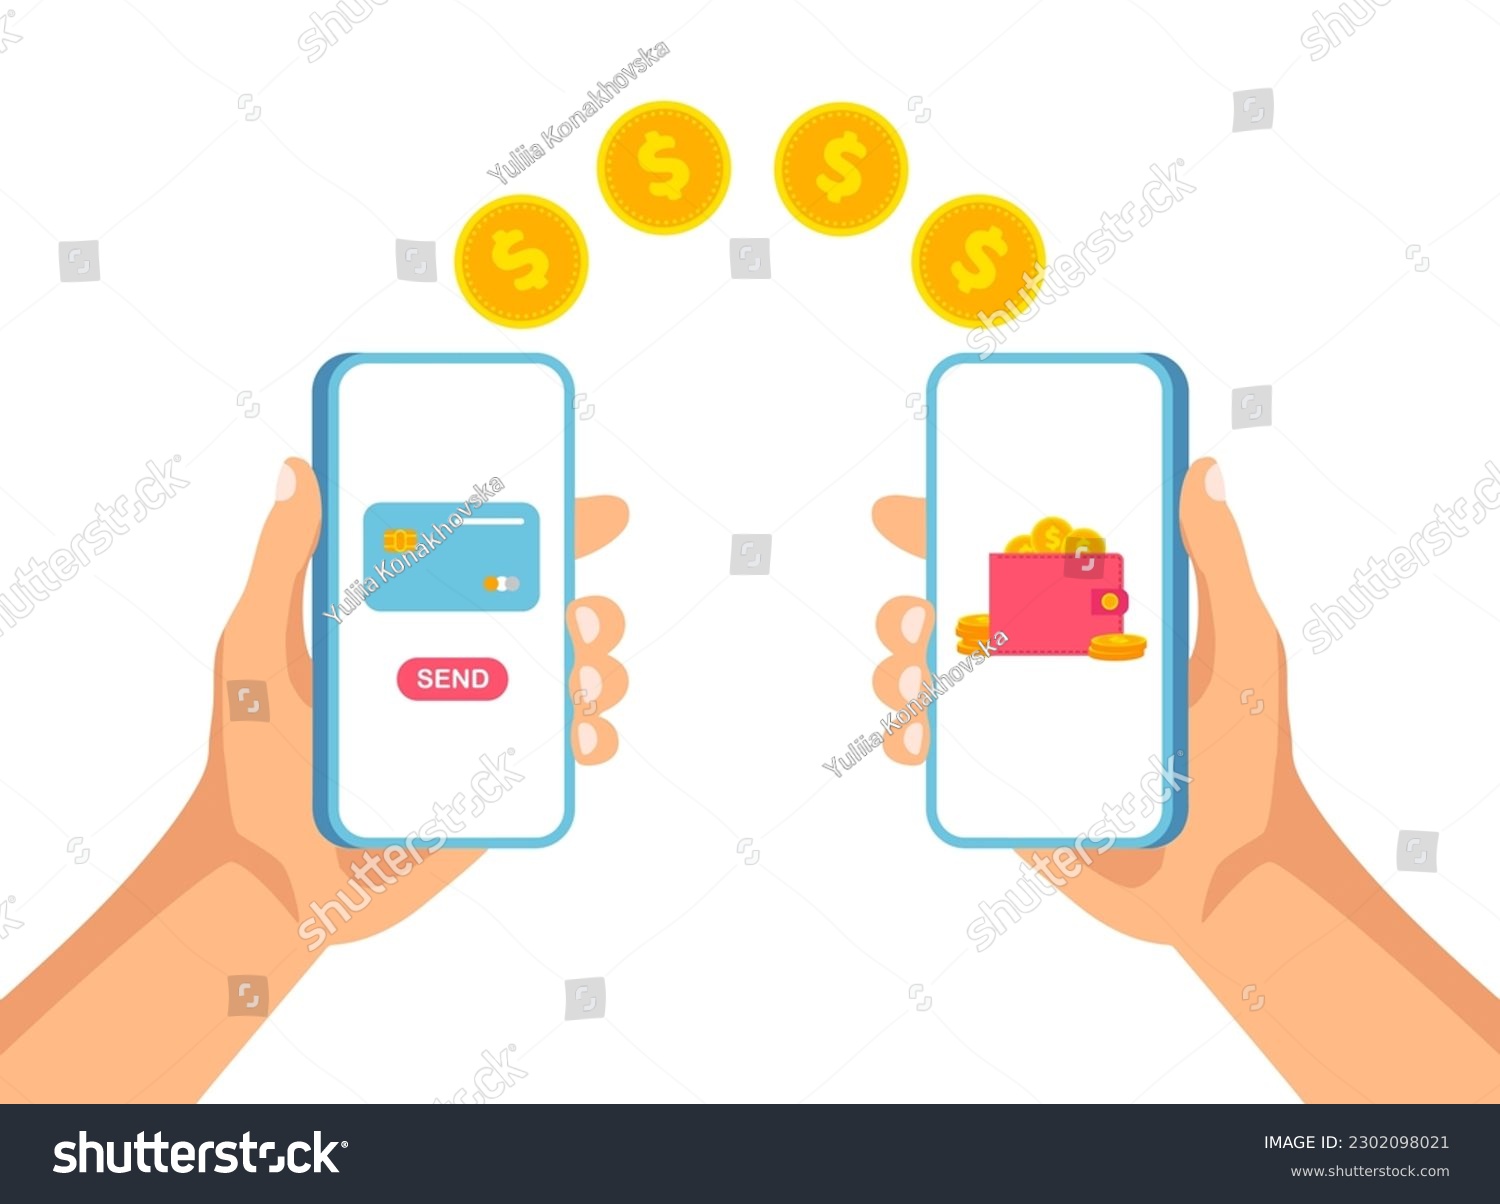 SVG of Mobile money transfer. Online payment between two smartphones. Banking app template. Hand holds smartphone and sending and receiving moneys wireless. Vector illustration isolated on white. svg